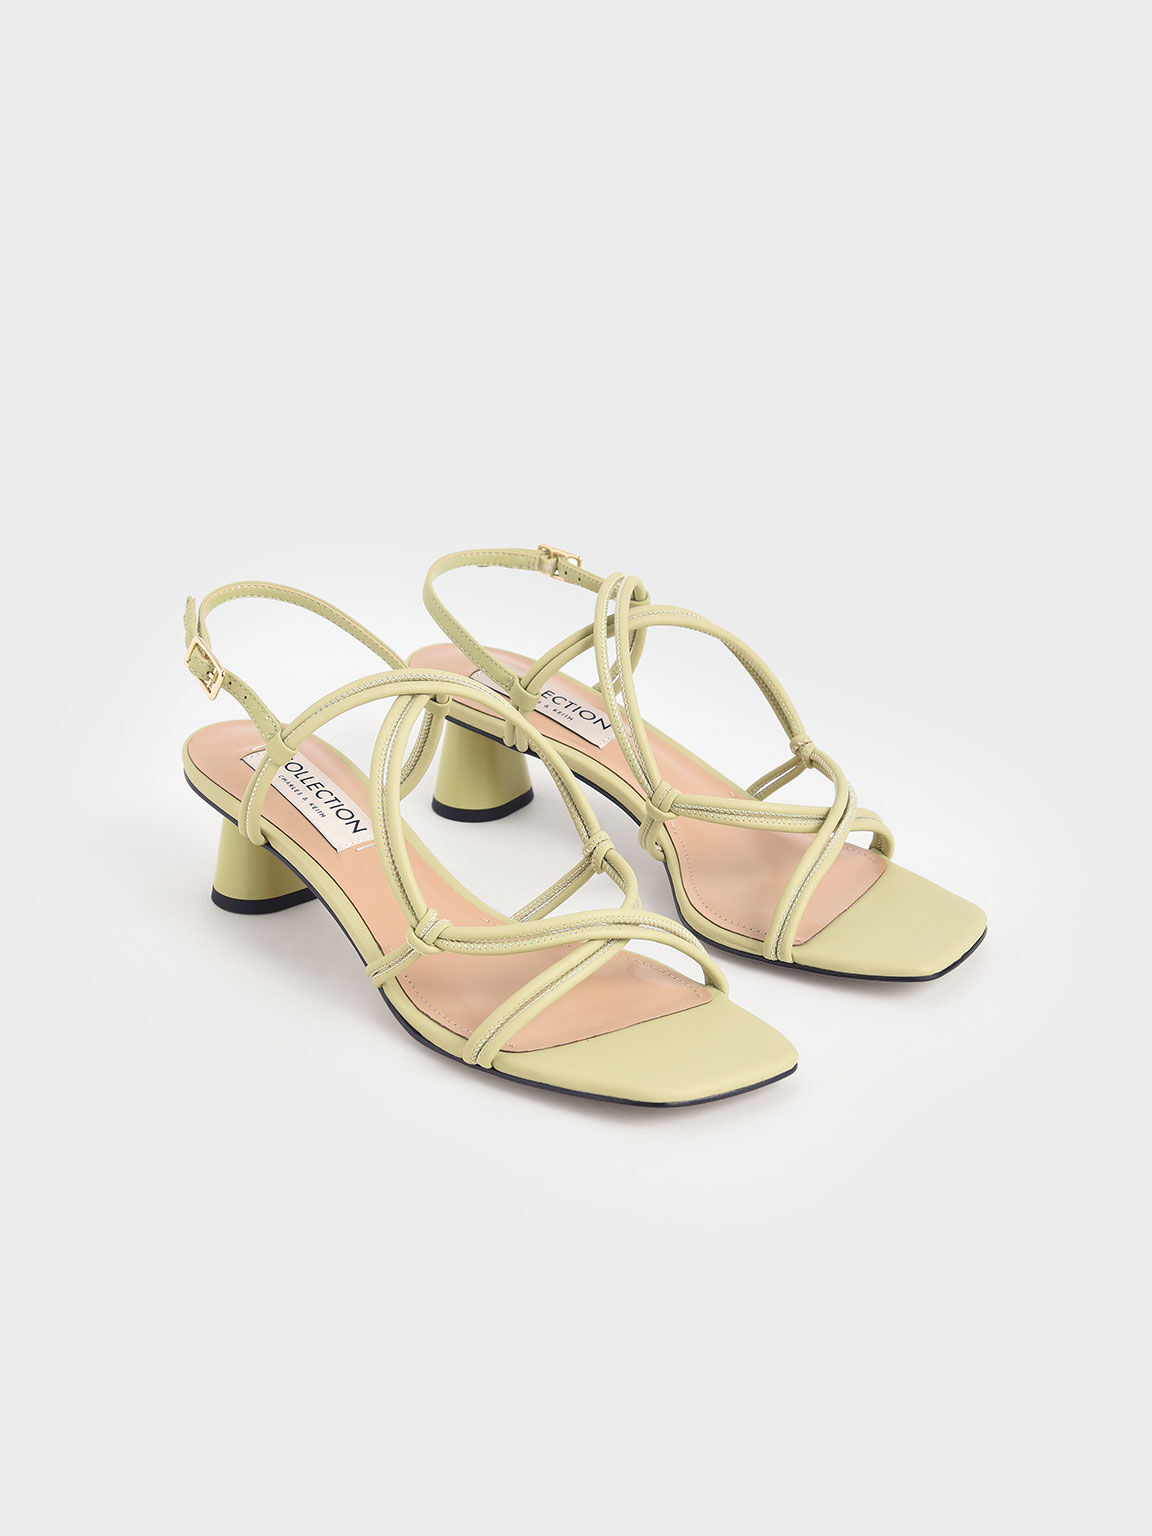 Leather Strappy Knotted Sandals, Green, hi-res